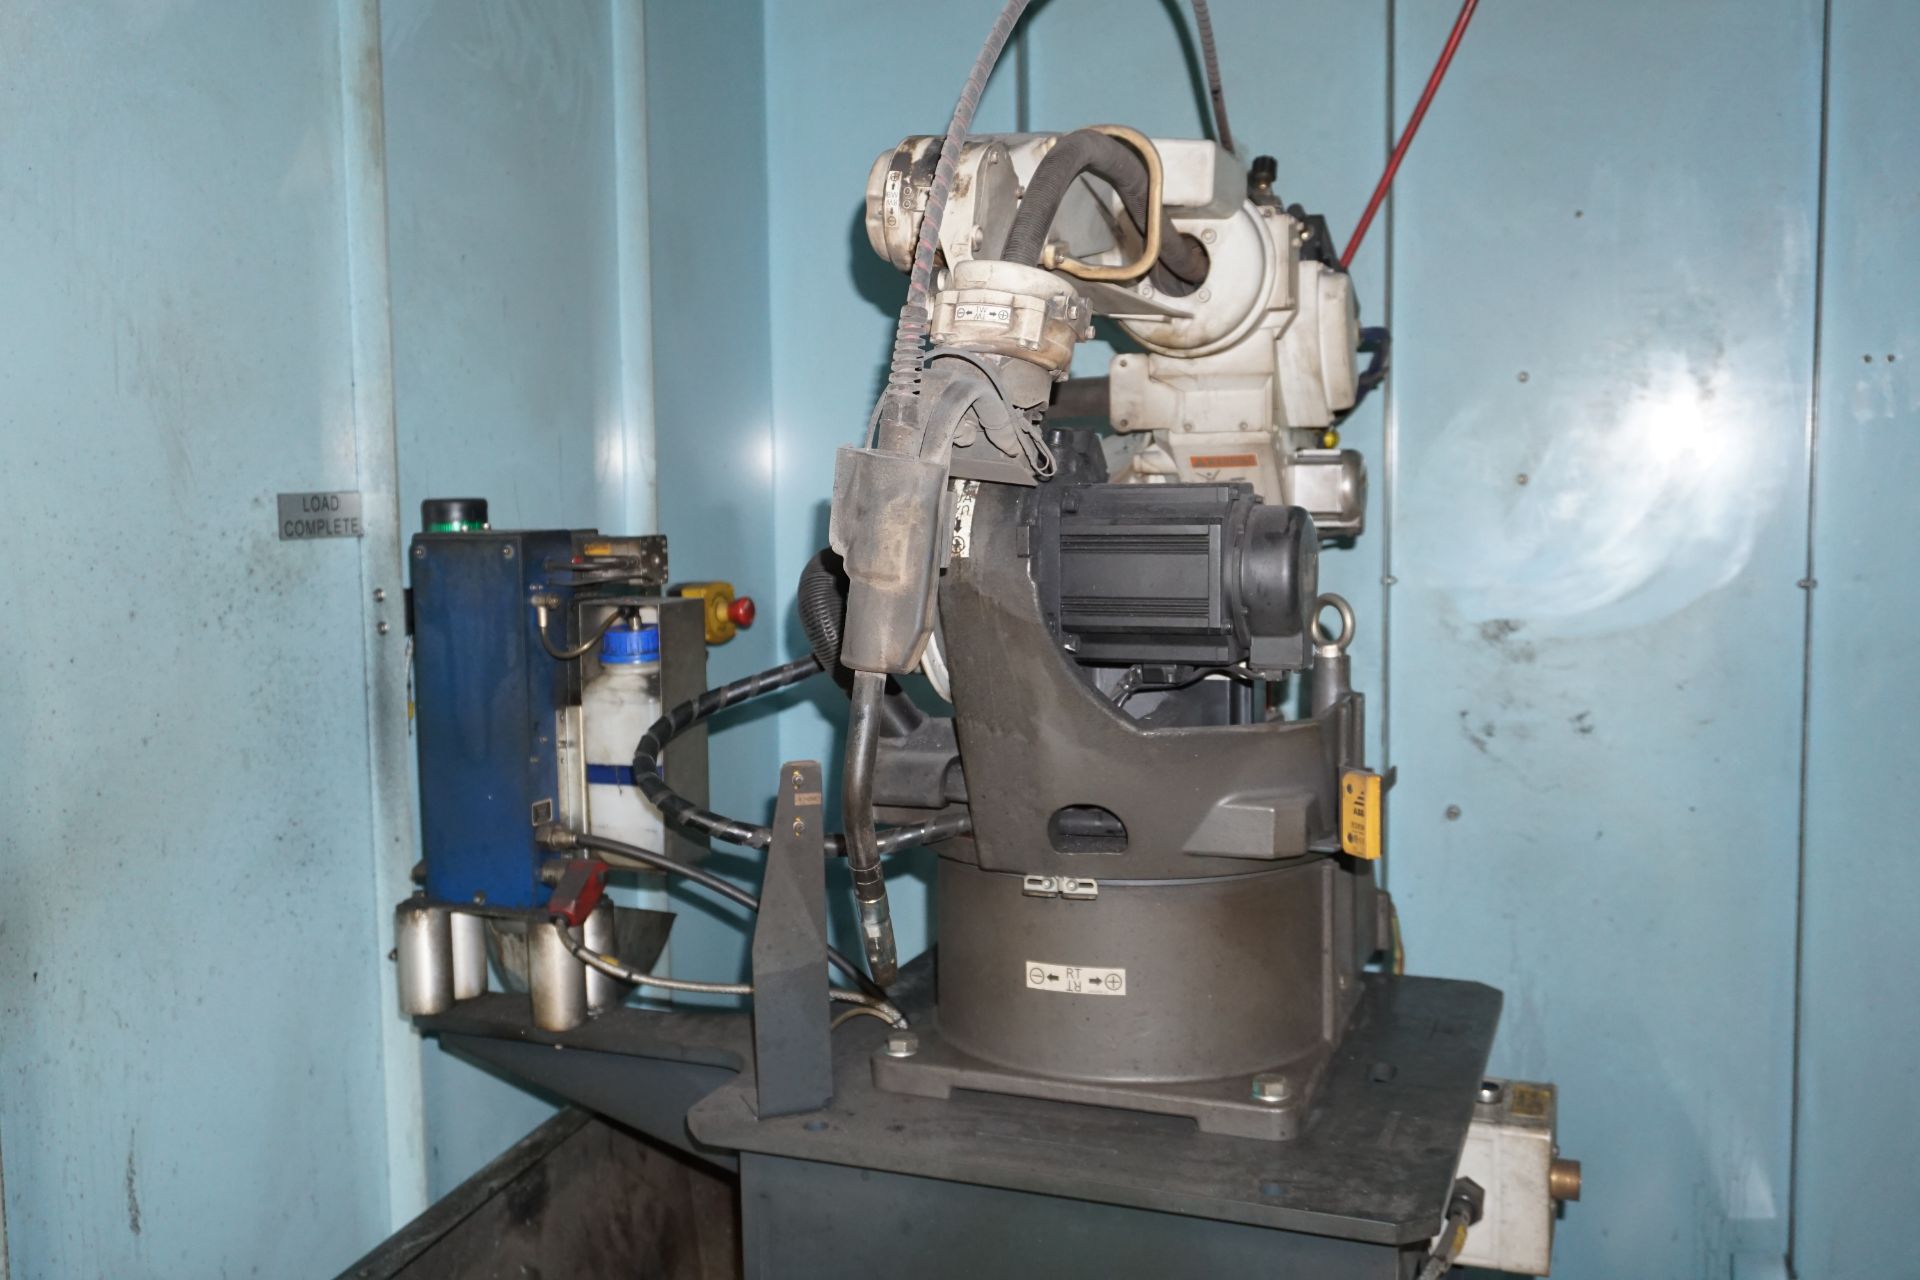 Box frame mounted MiG welding robot cell with a Panasonic TM -1400 WG III 6 axis MiG robot - Image 5 of 9